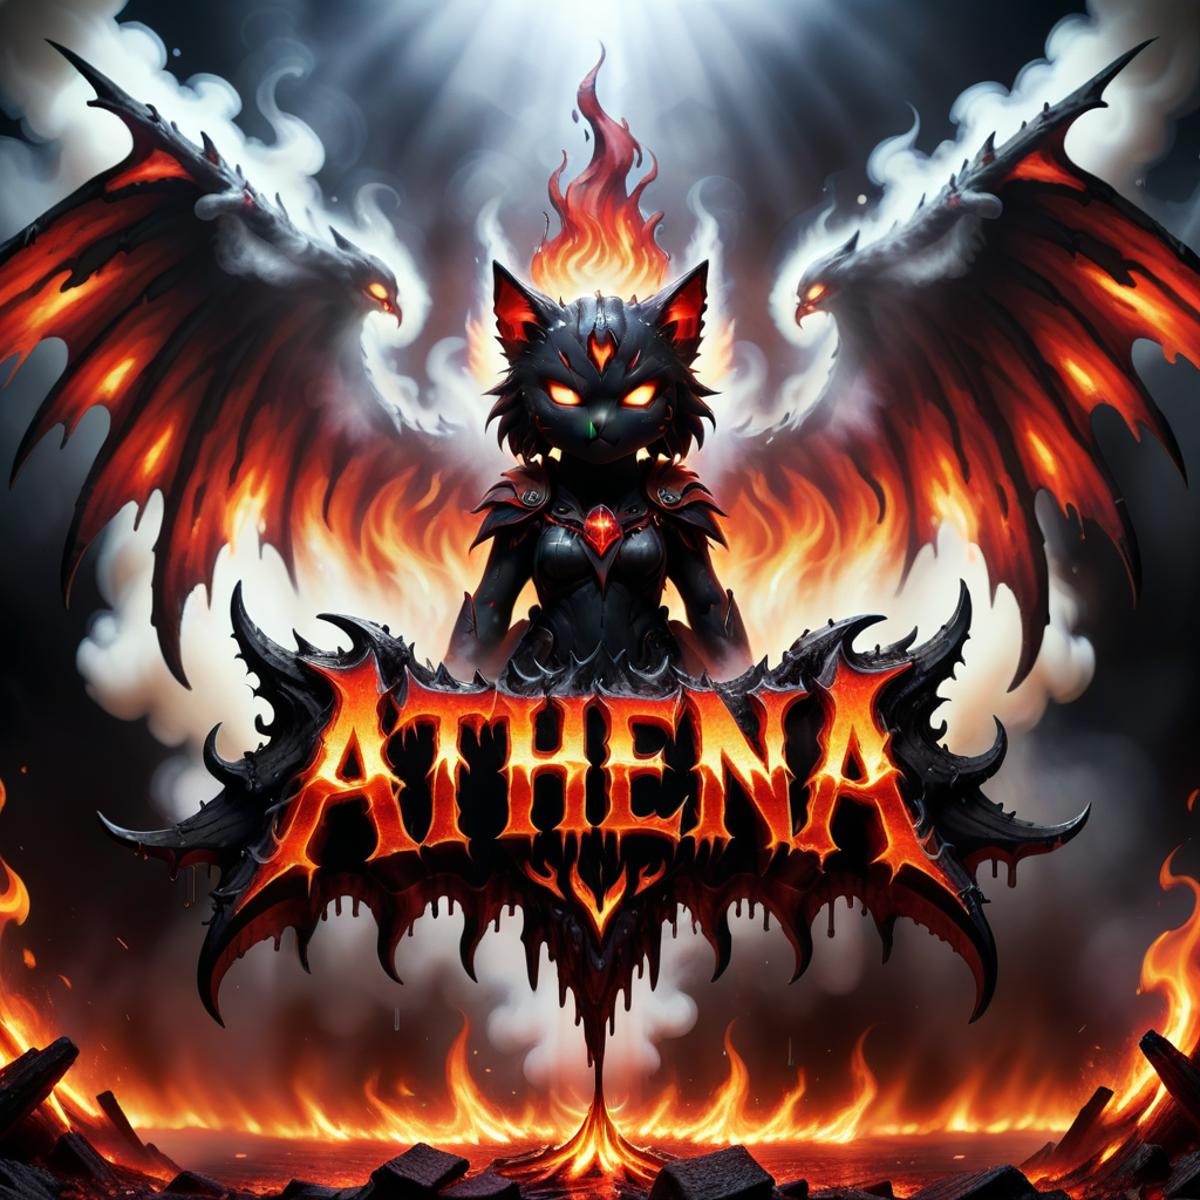 A fiery demon cat with red eyes and horns, named Athena, is displayed in a dark and fiery background.